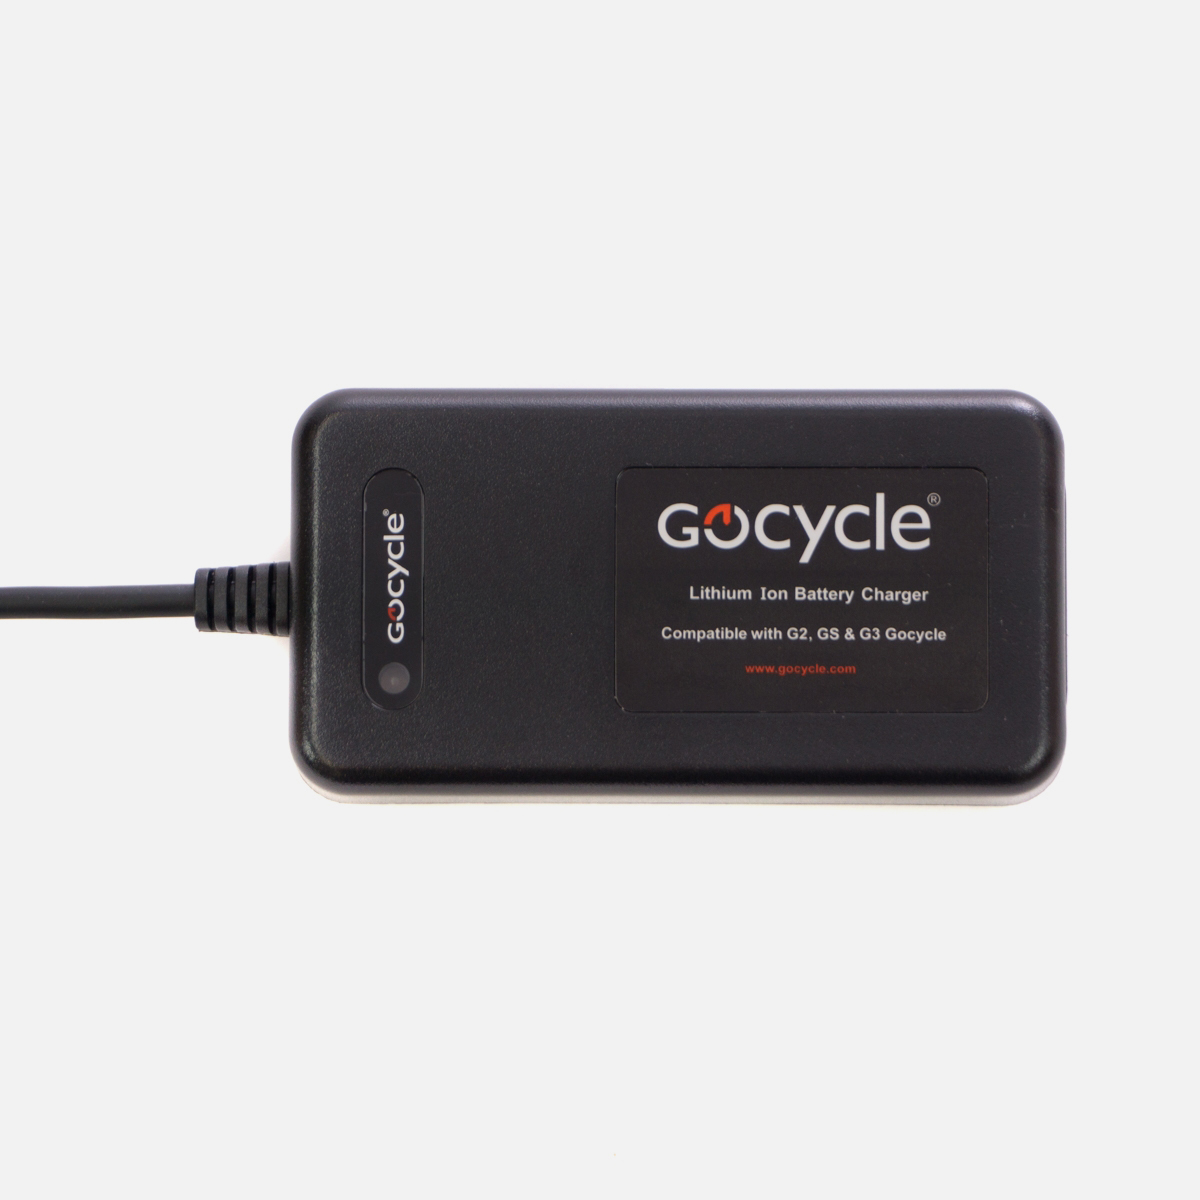 Gocycle Battery Charger - 2 Amp